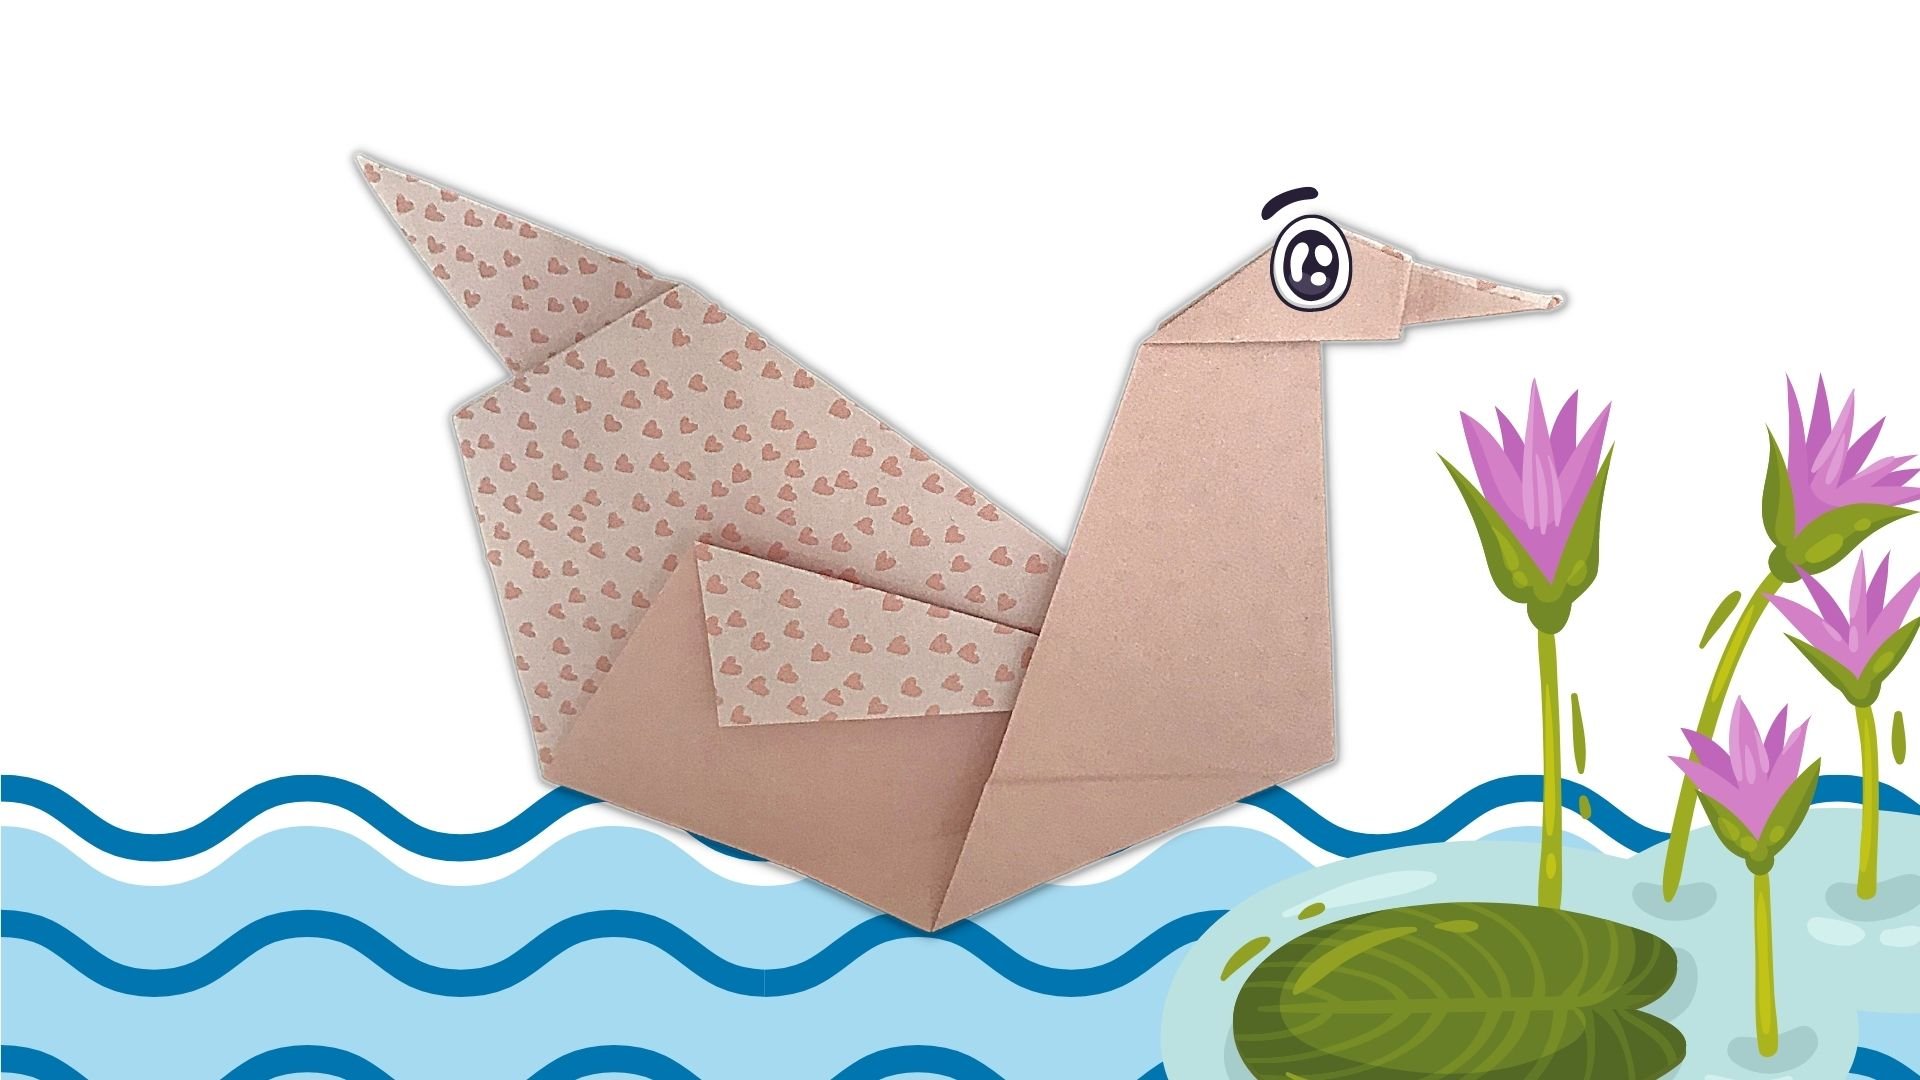 Symbol of love and fidelity, what if you learned to fold an origami swan?